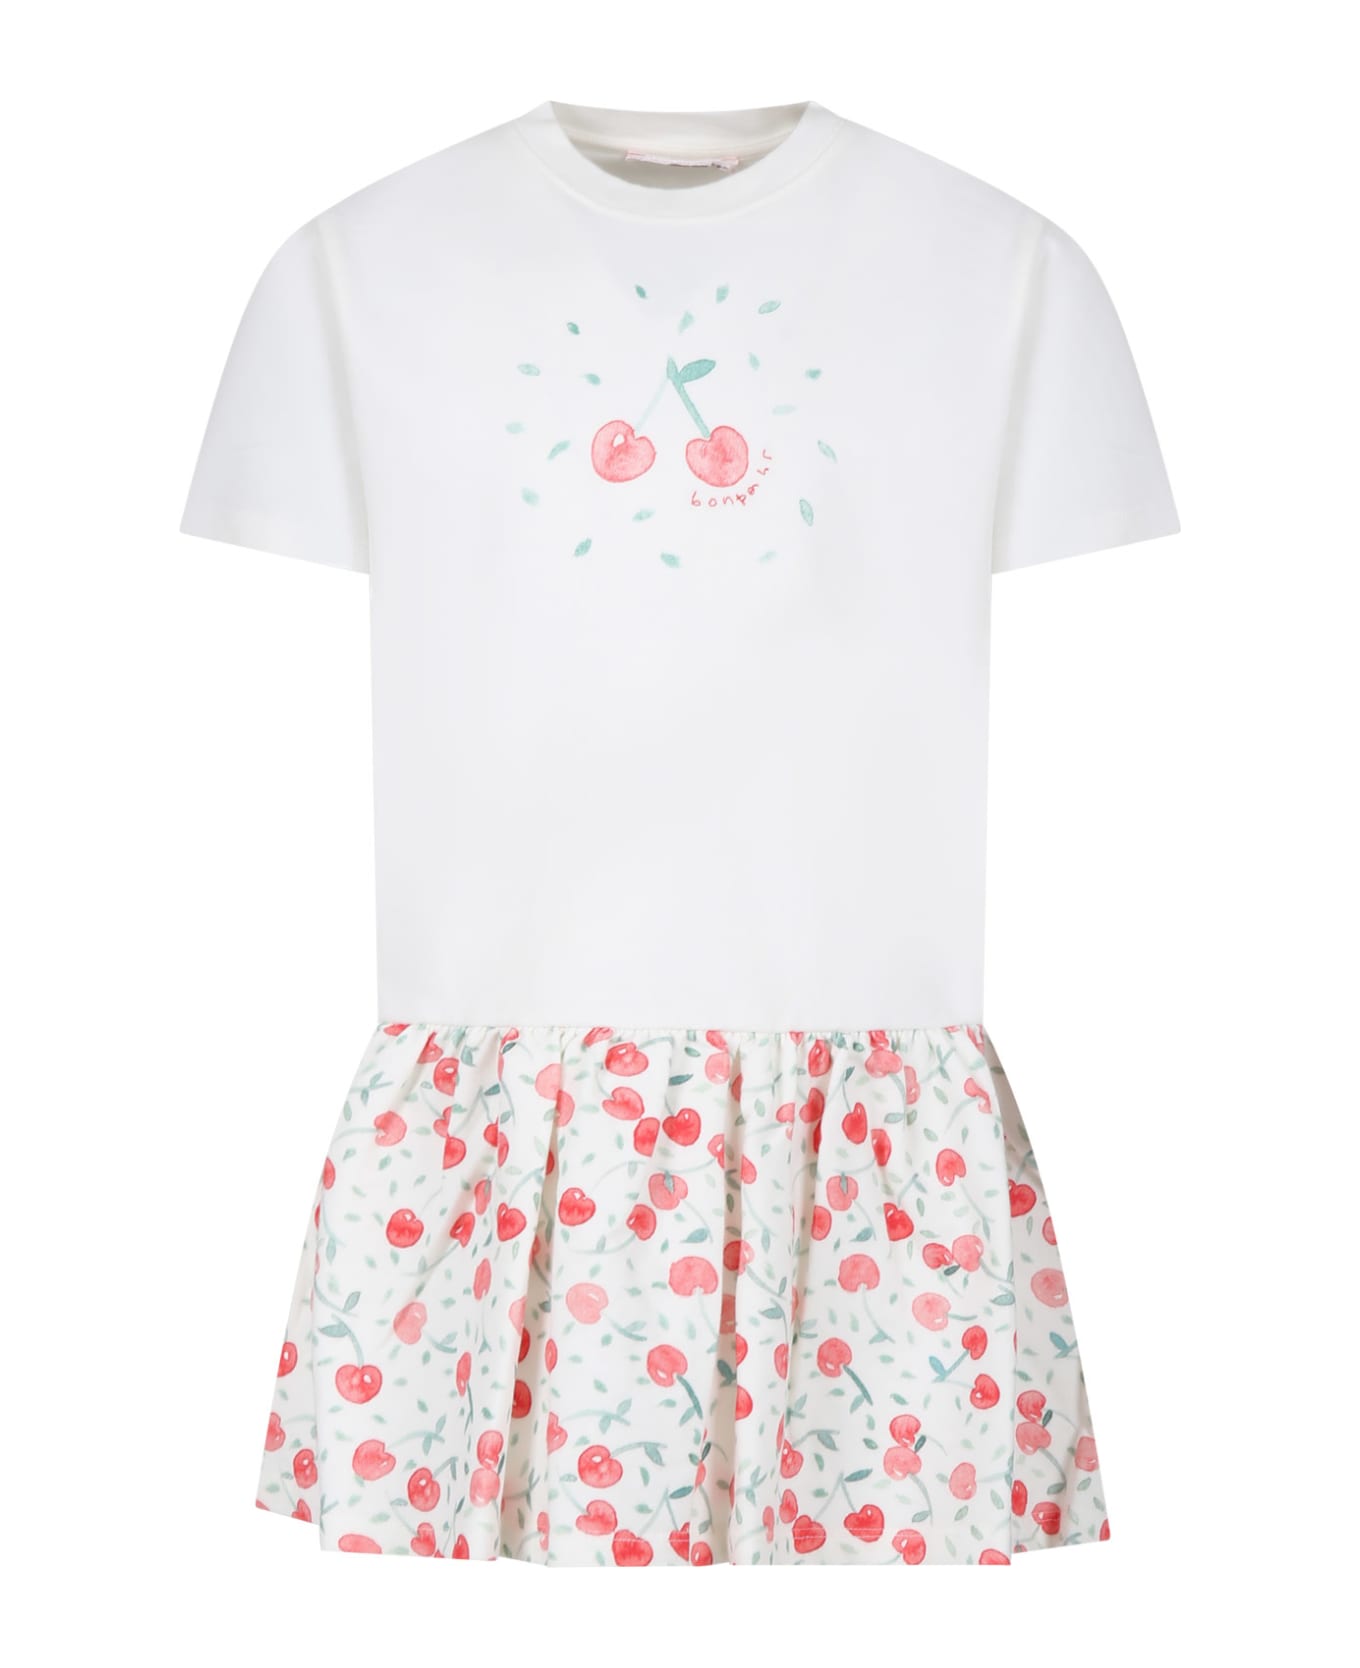 Bonpoint White Dress For Girl With Cherries Print - Off white